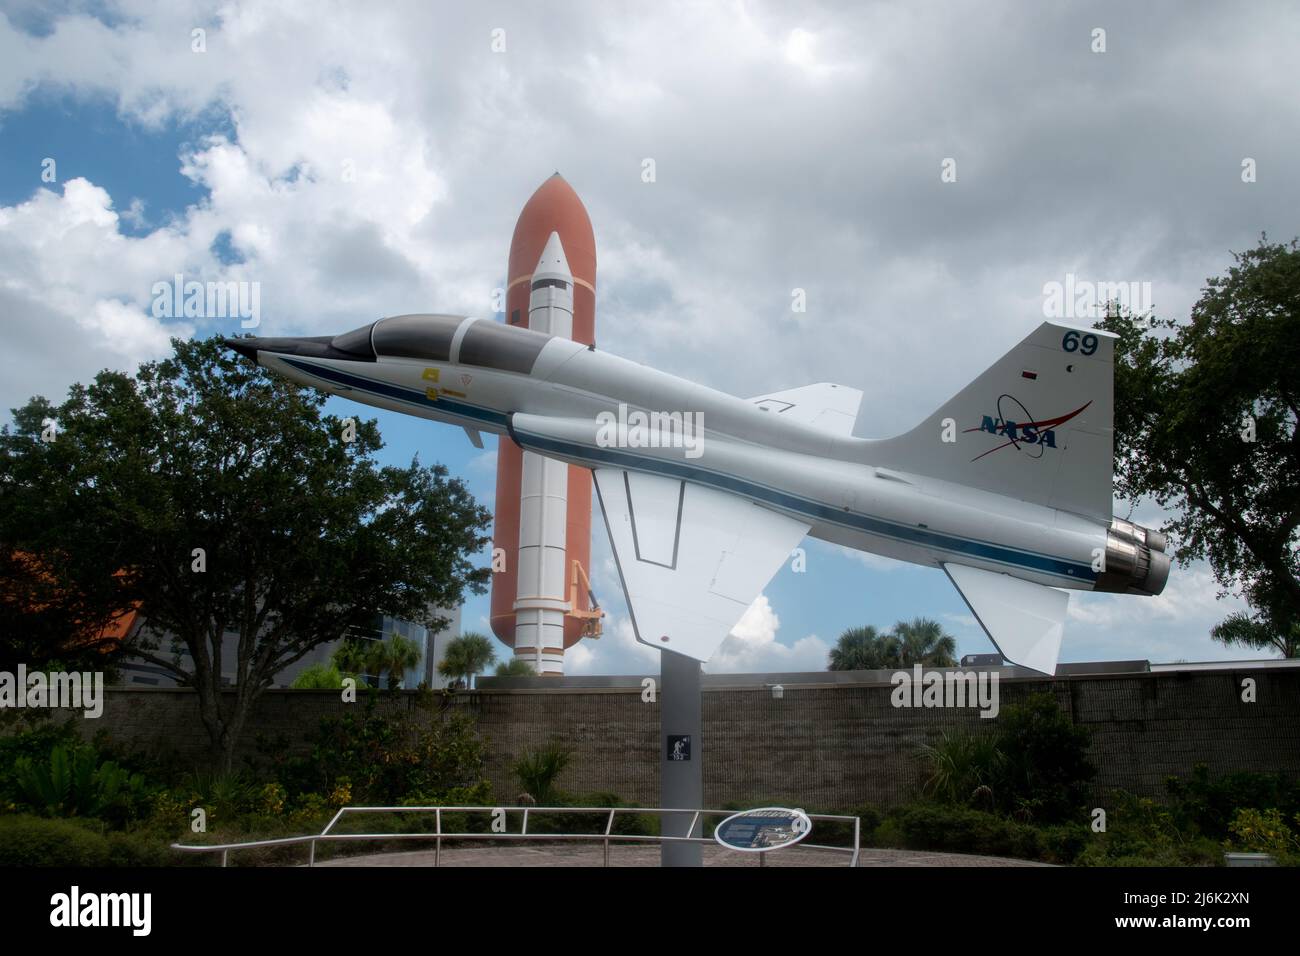 Cape Canaveral, FL - Sep 10 2021: A NASA T-38 Talon research airplane with an orbital booster in the background from the Kennedy Space Center Stock Photo